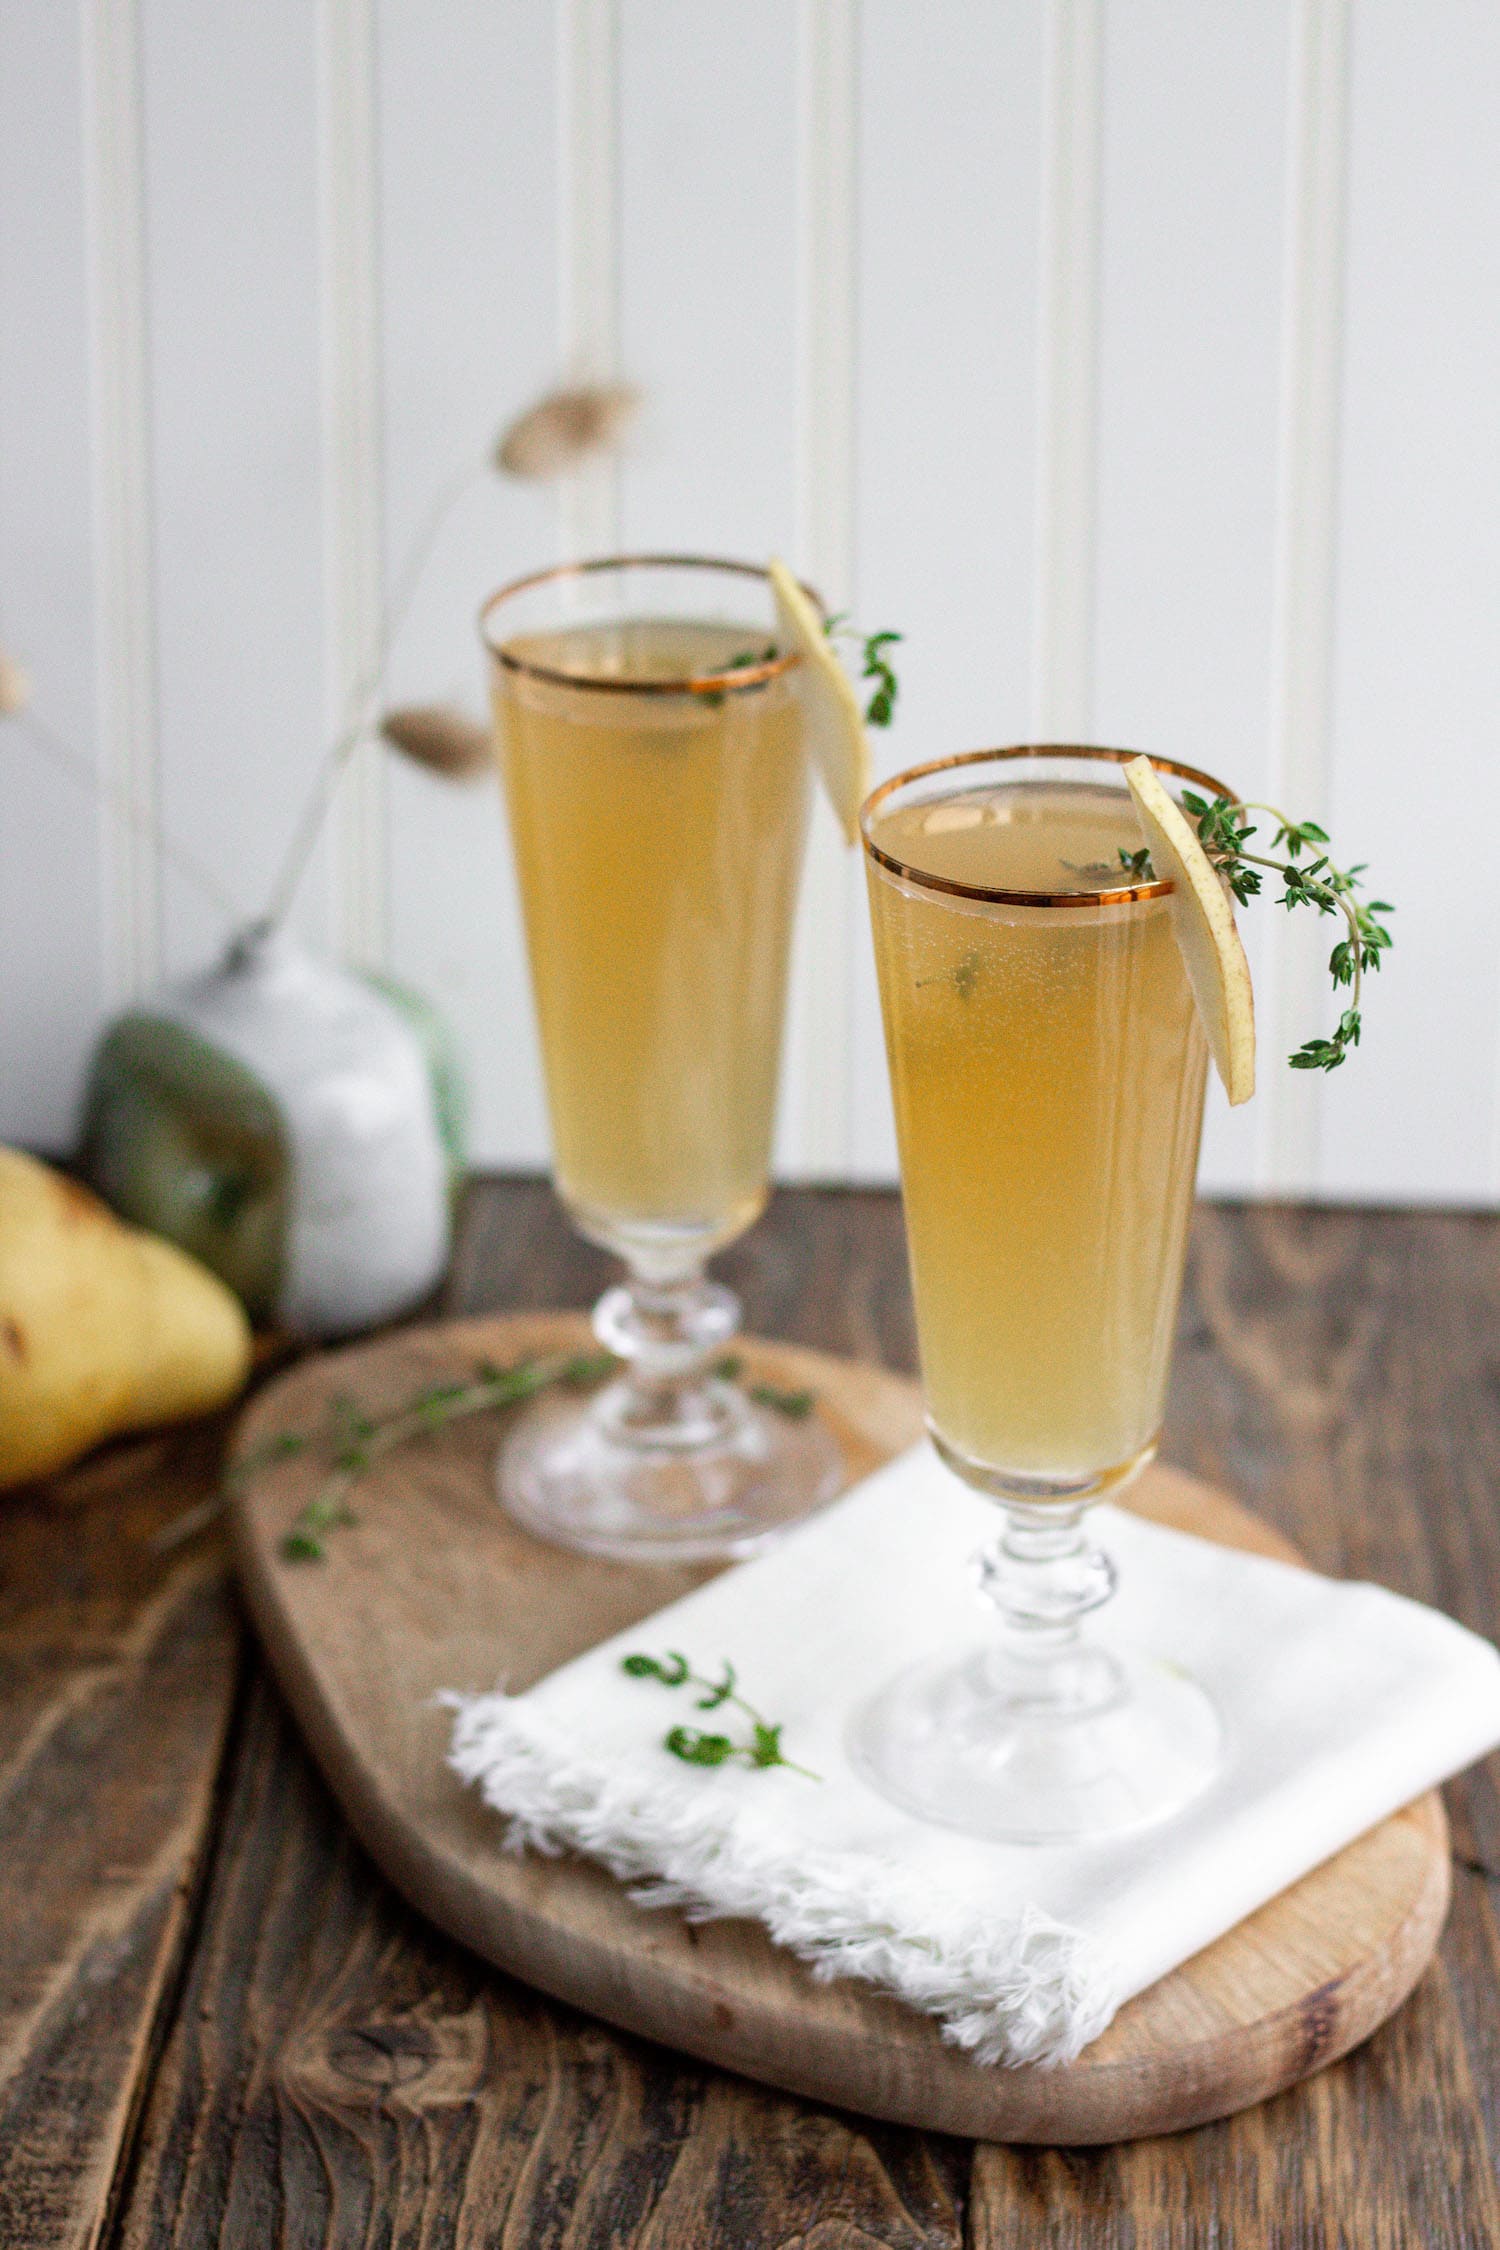 13 Thanksgiving Cocktails: Pear and Apple Cider Mimosa